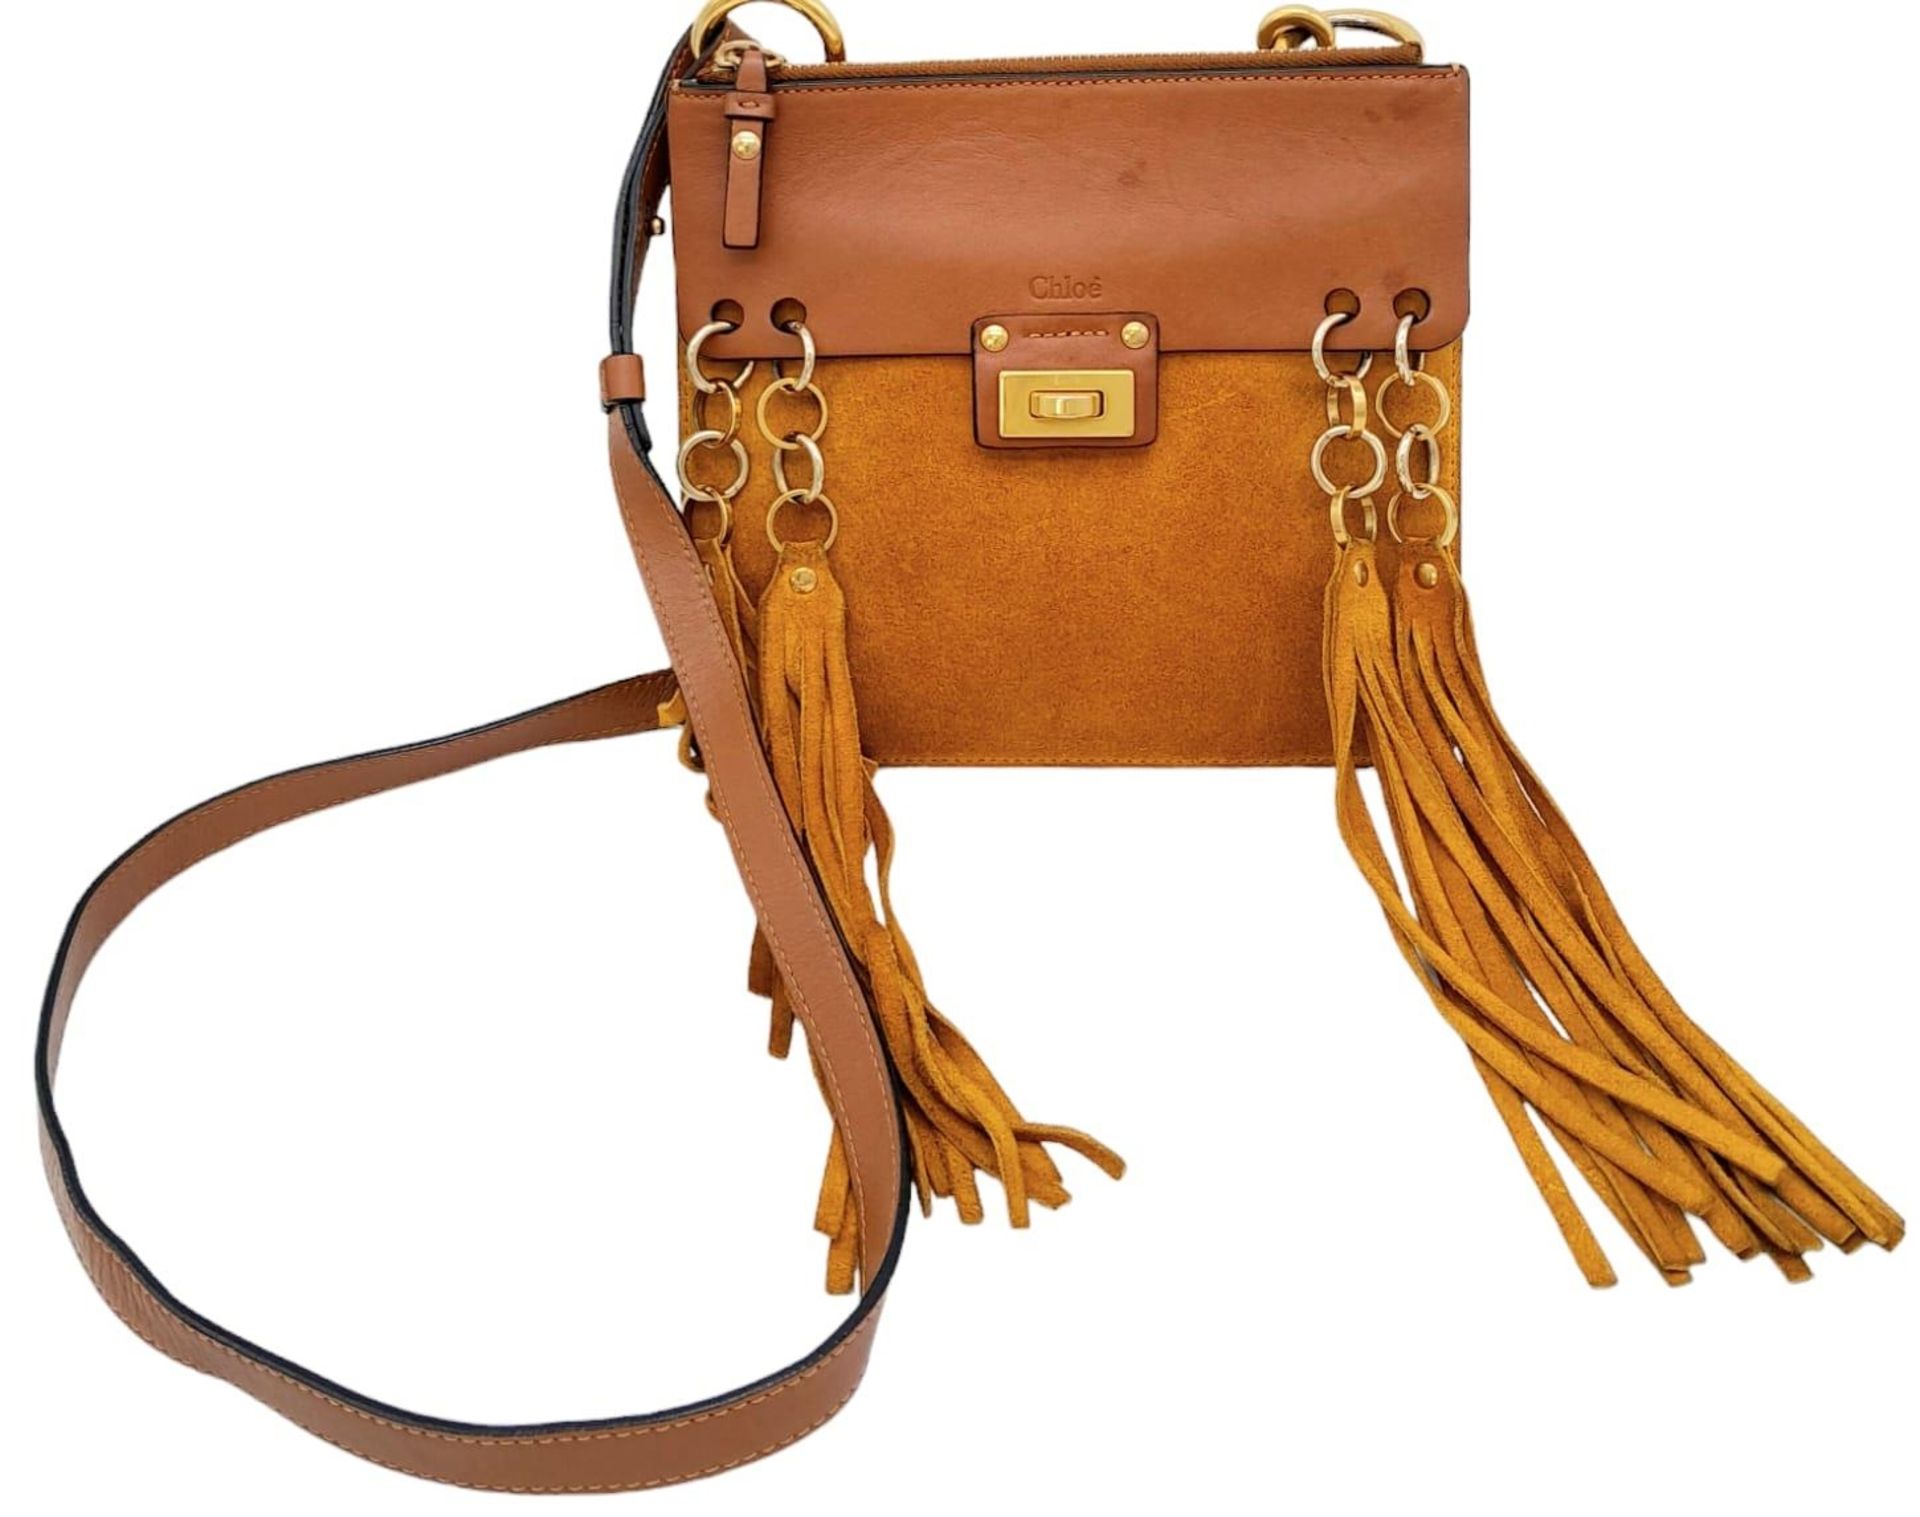 A Chloe Brown and Mustard 'Jane' Shoulder Bag. Leather and suede exterior with gold-toned - Image 2 of 8